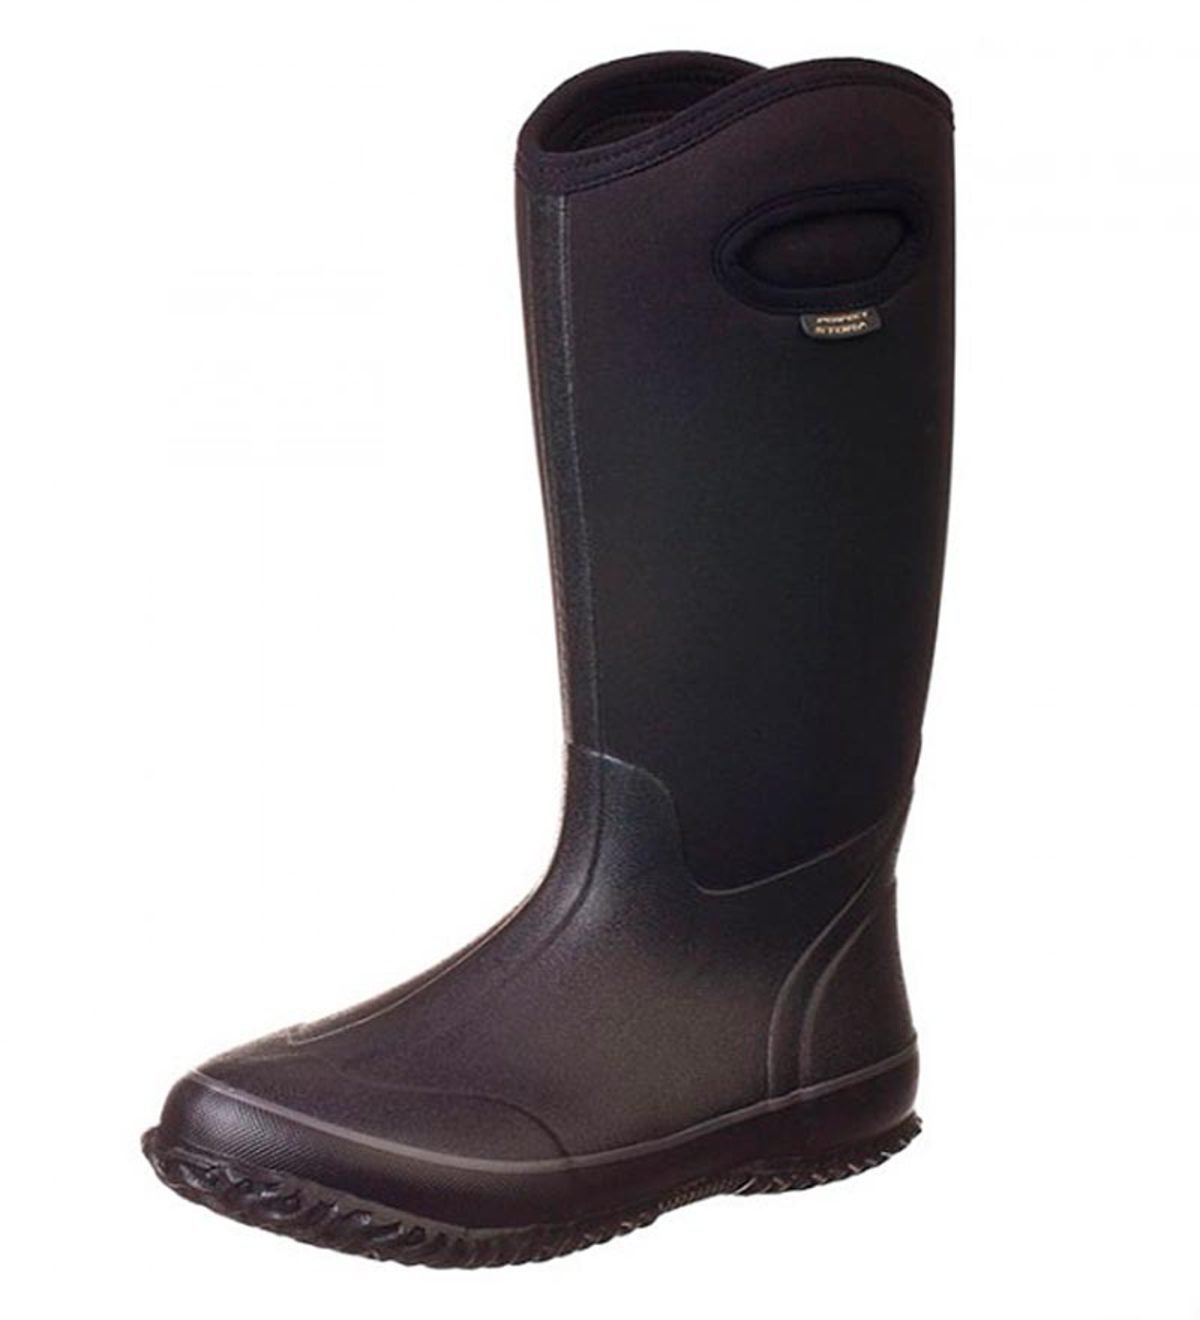 Women's Perfect Storm High Boots - Black - Size 6 | PlowHearth